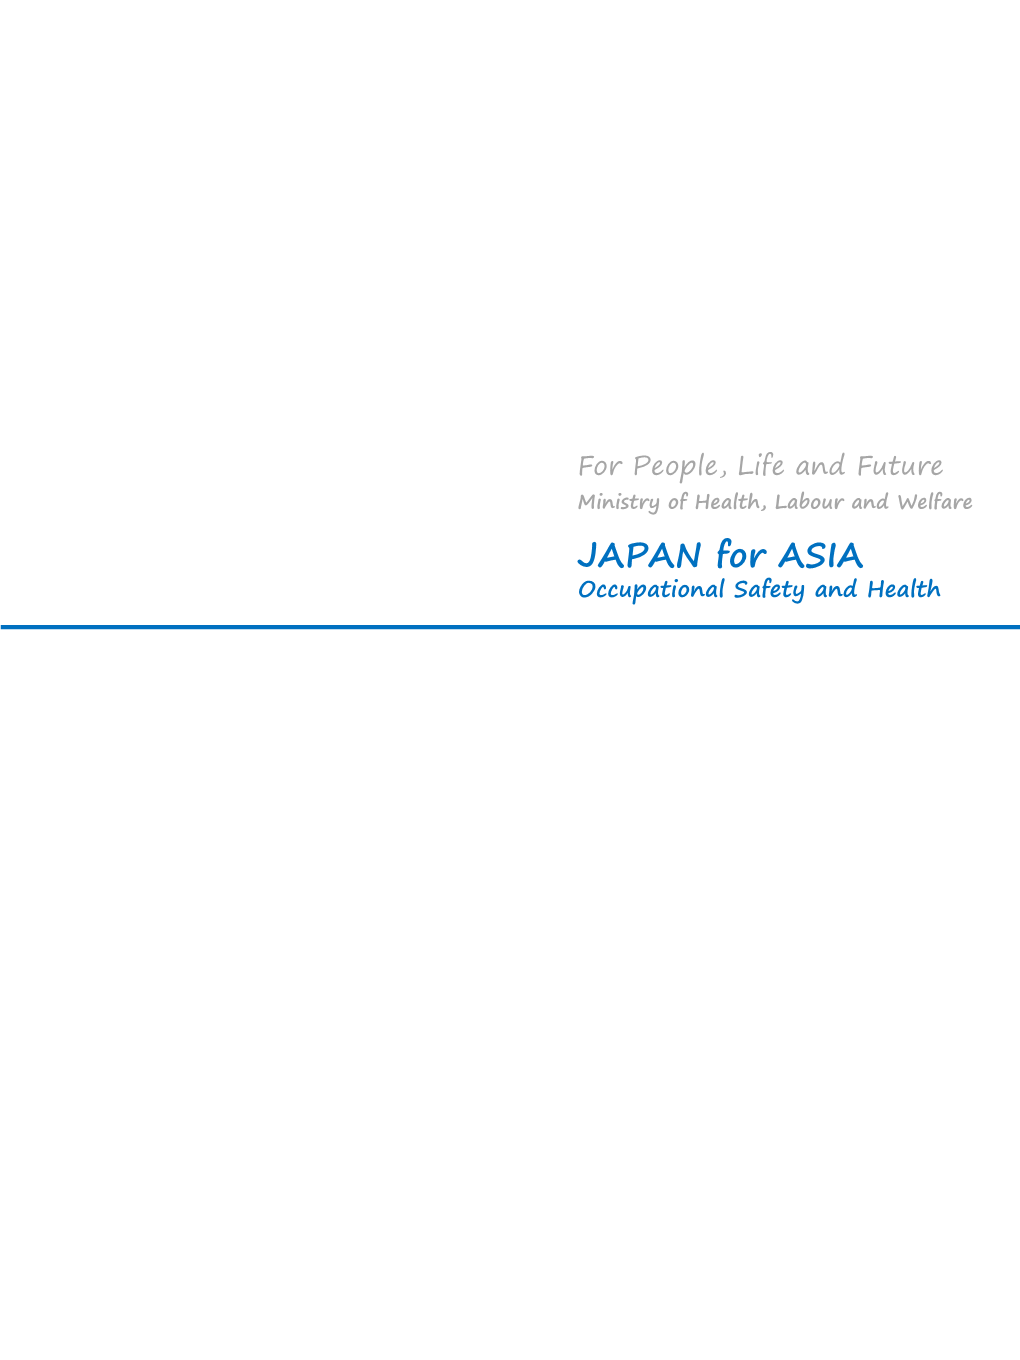 JAPAN for ASIA Occupational Safety and Health the Rapid Economic Growth of Japan Has Been Supported by Workers